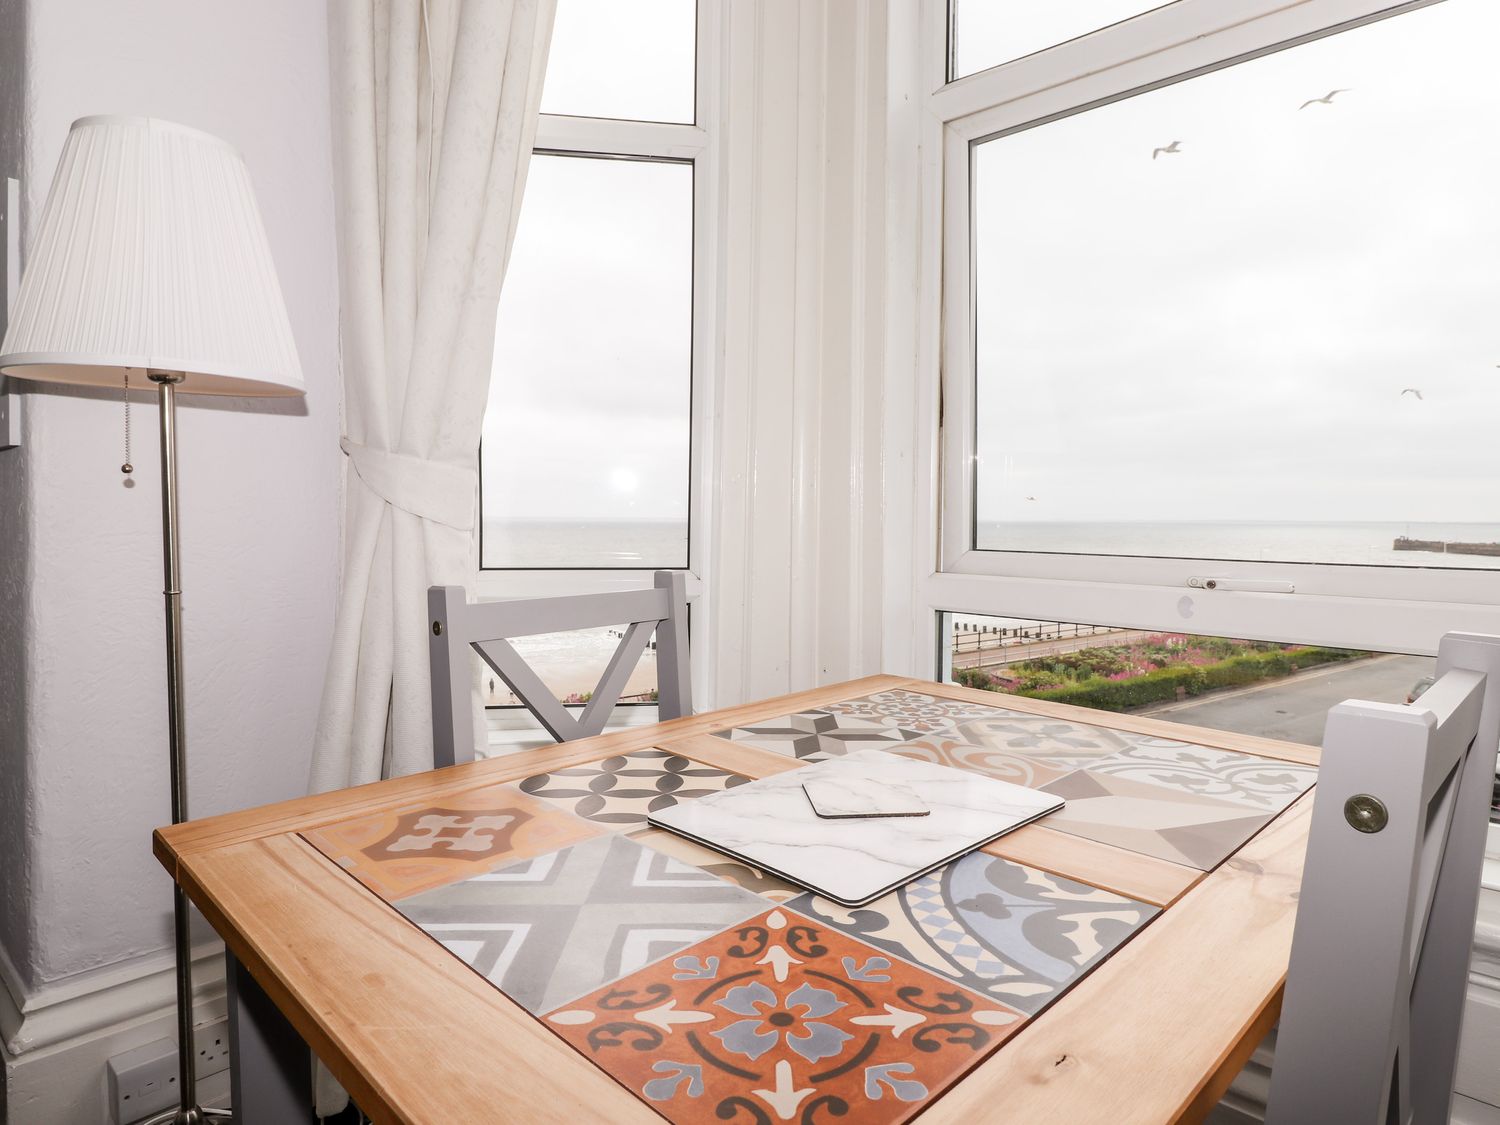 5 Beach View @ Beaconsfield House - North Yorkshire (incl. Whitby) - 1136855 - photo 1